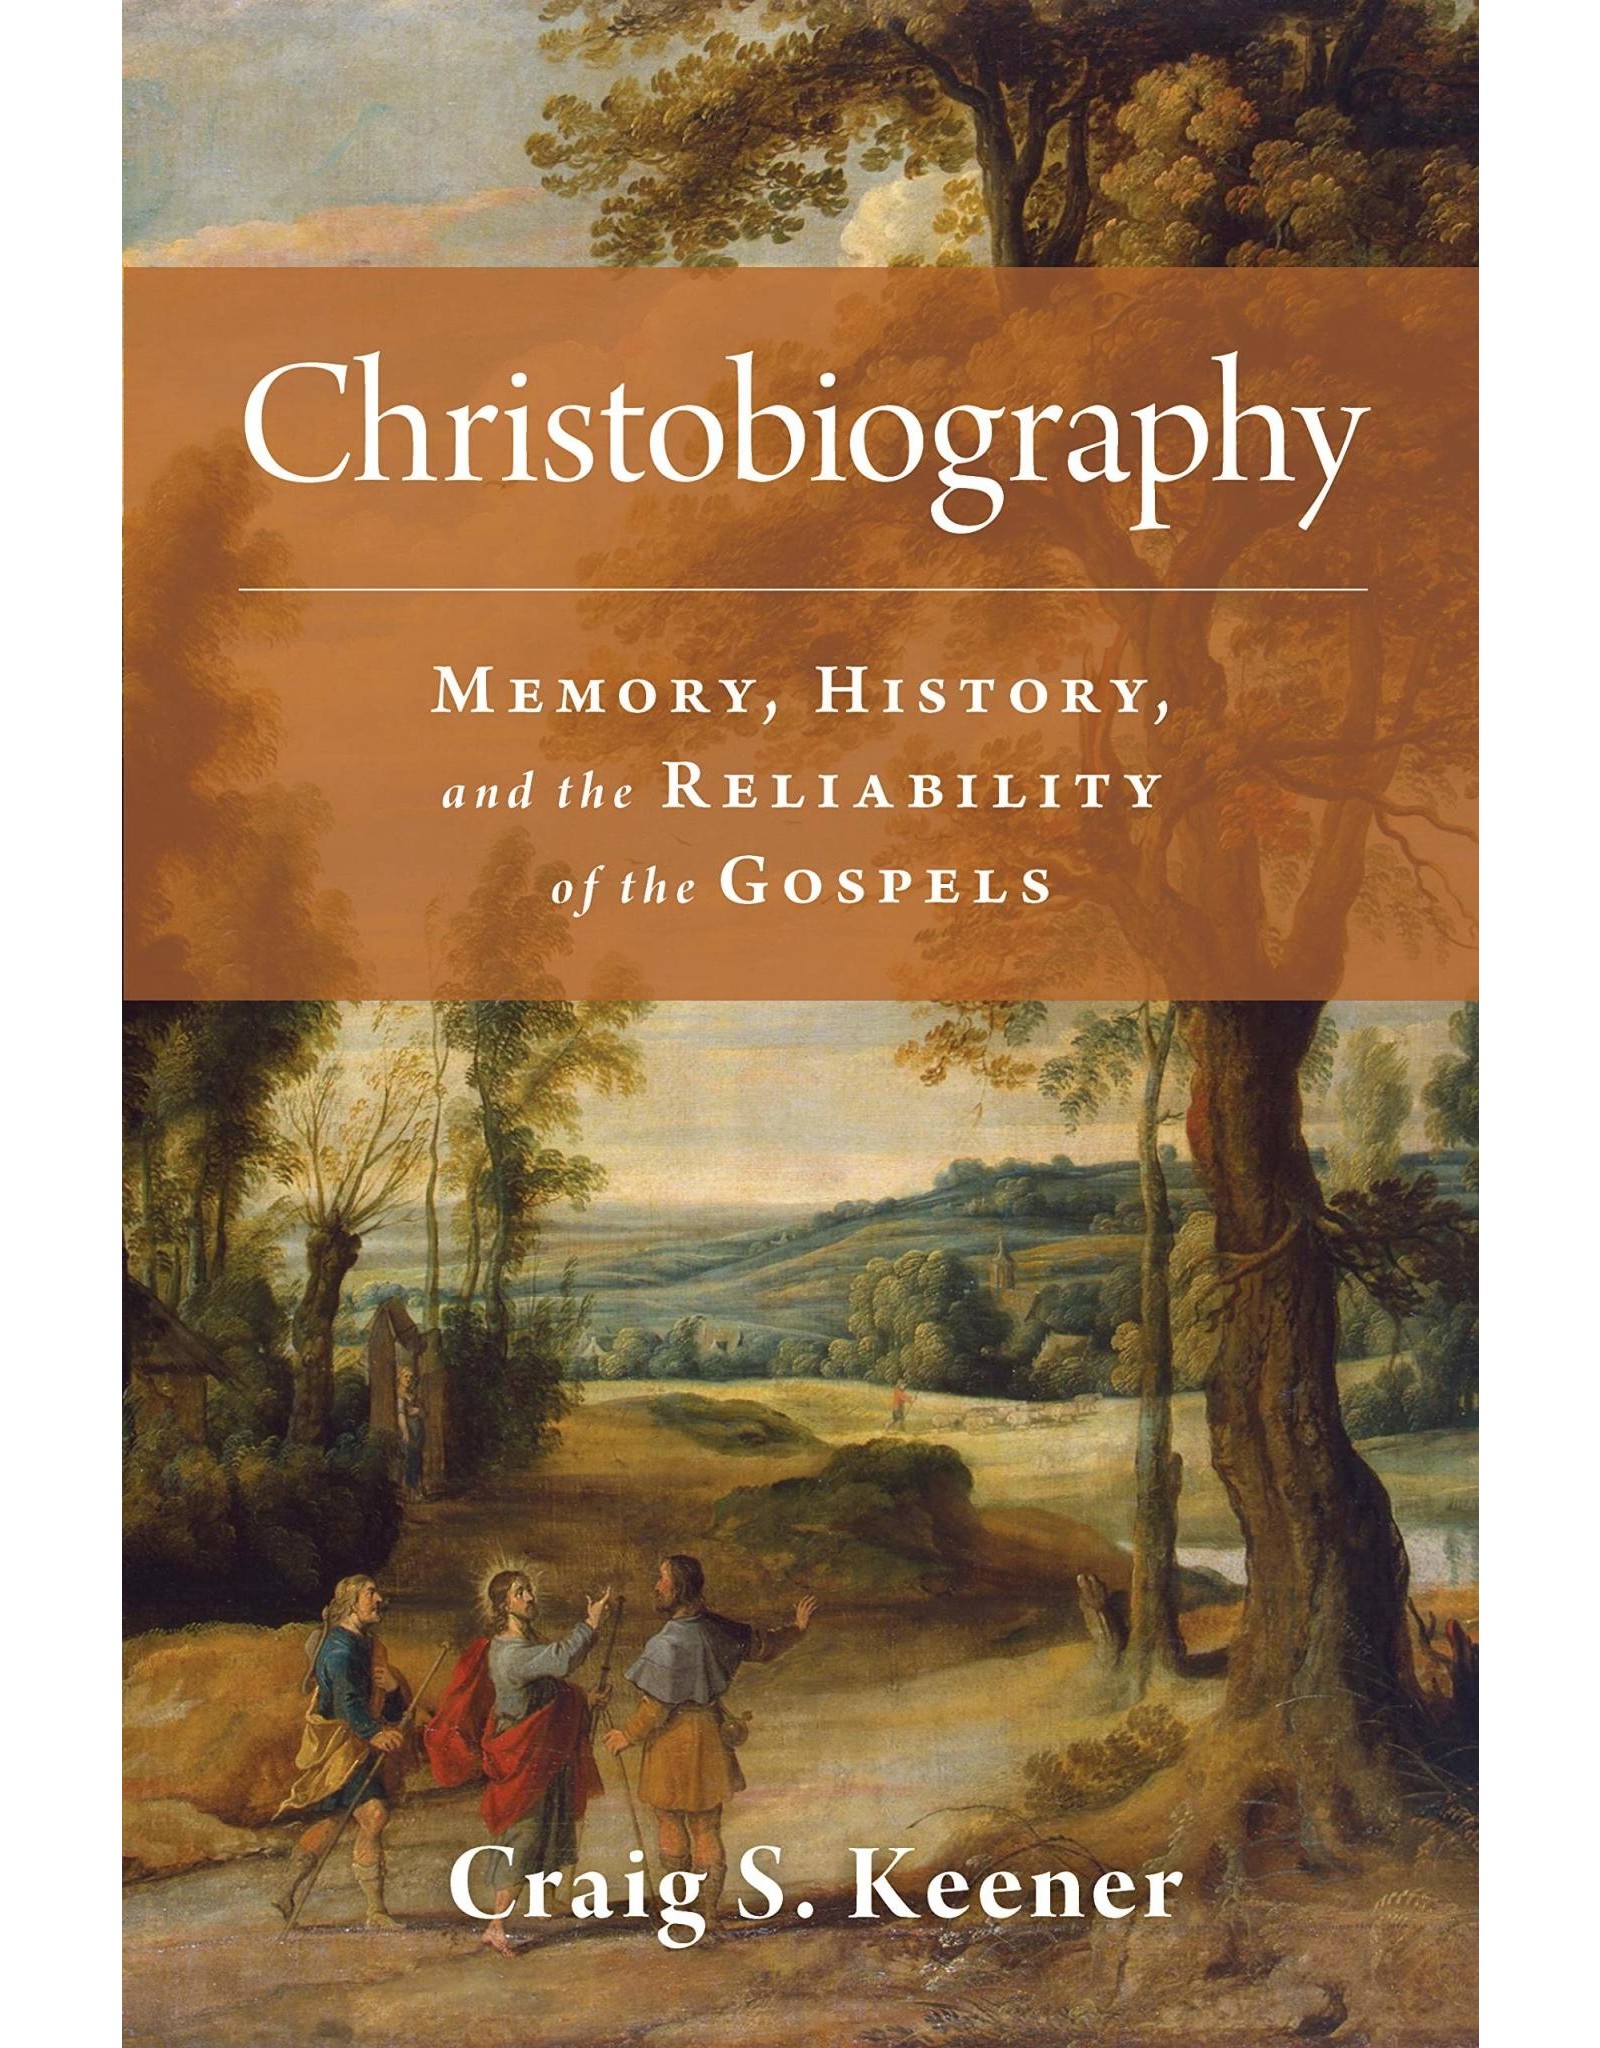 Wm. B. Eerdmans Christobiography: Memory, History, and the Reliability of the Gospels